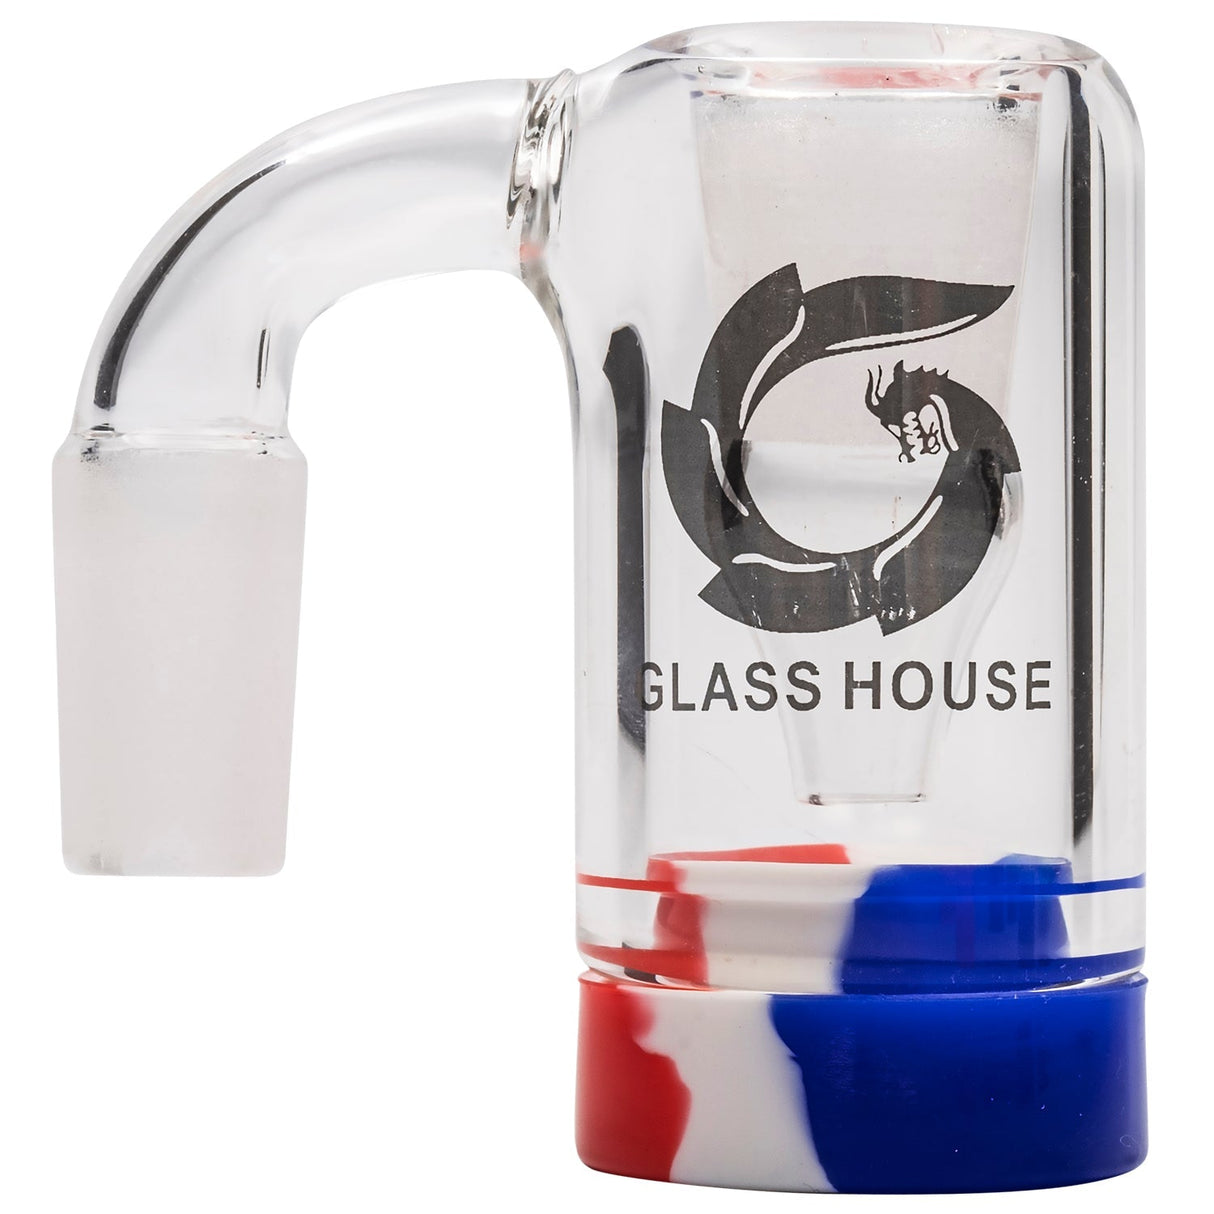 Glasshouse Quartz Reclaim Kit with Male Joint and Silicone Dishes in Red and Blue